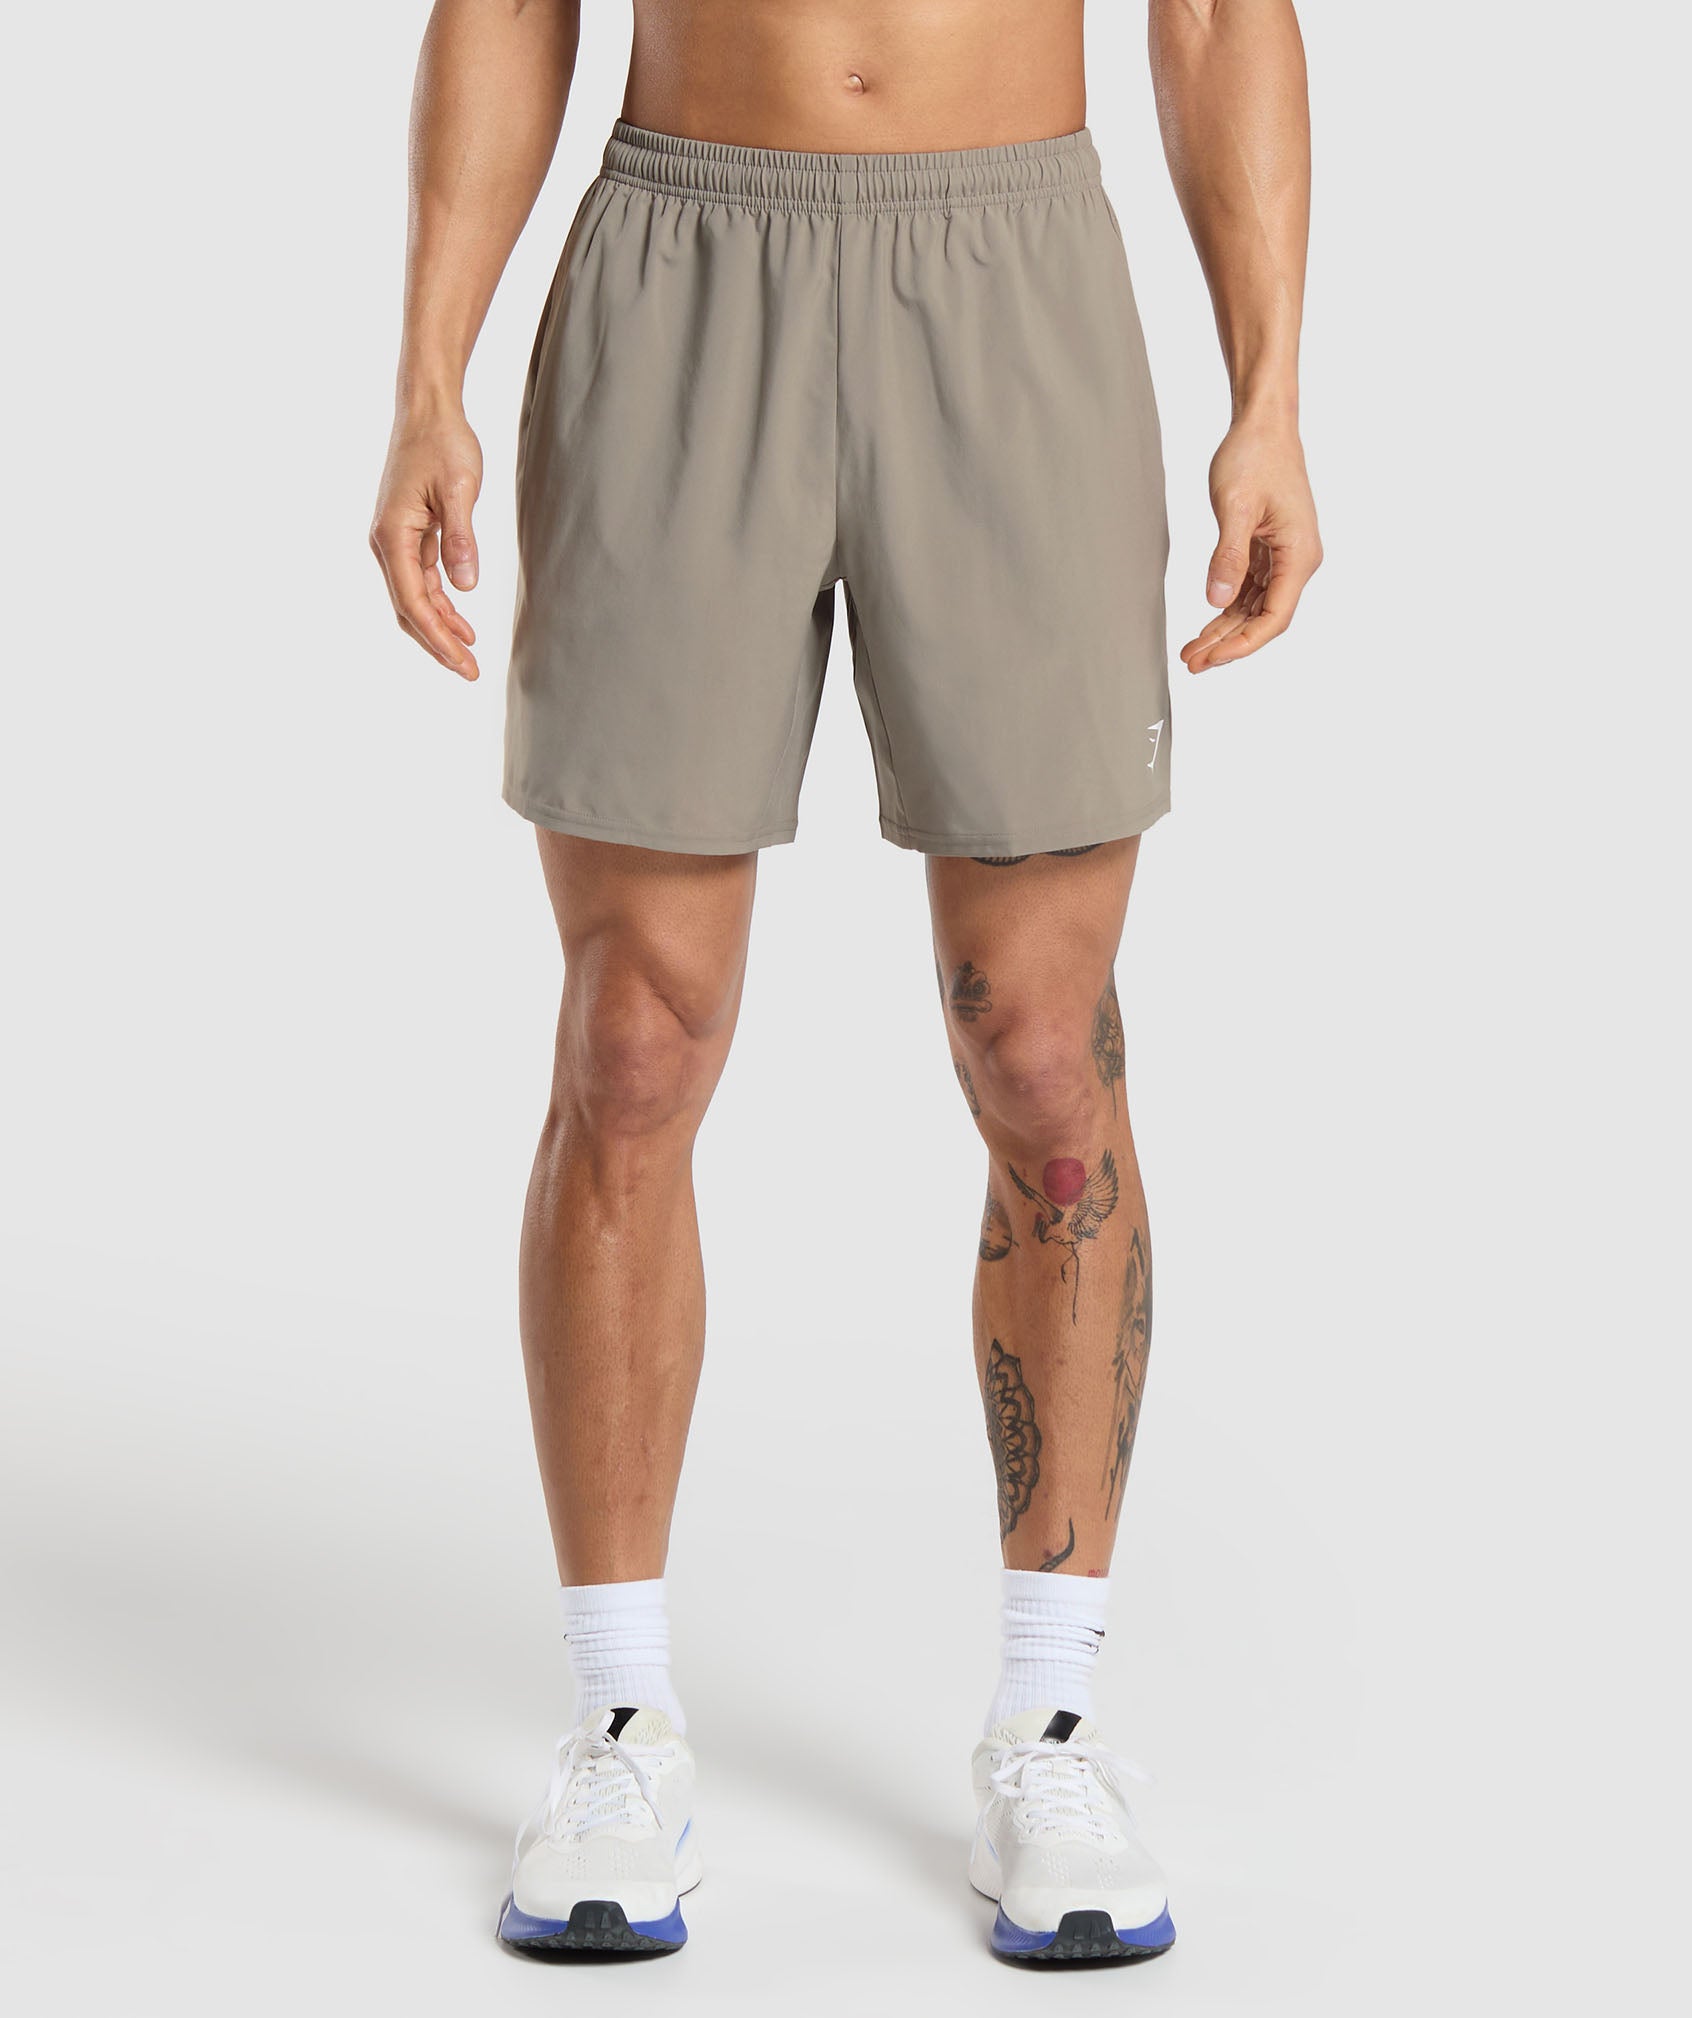 Arrival 7" Shorts in Linen Brown is out of stock